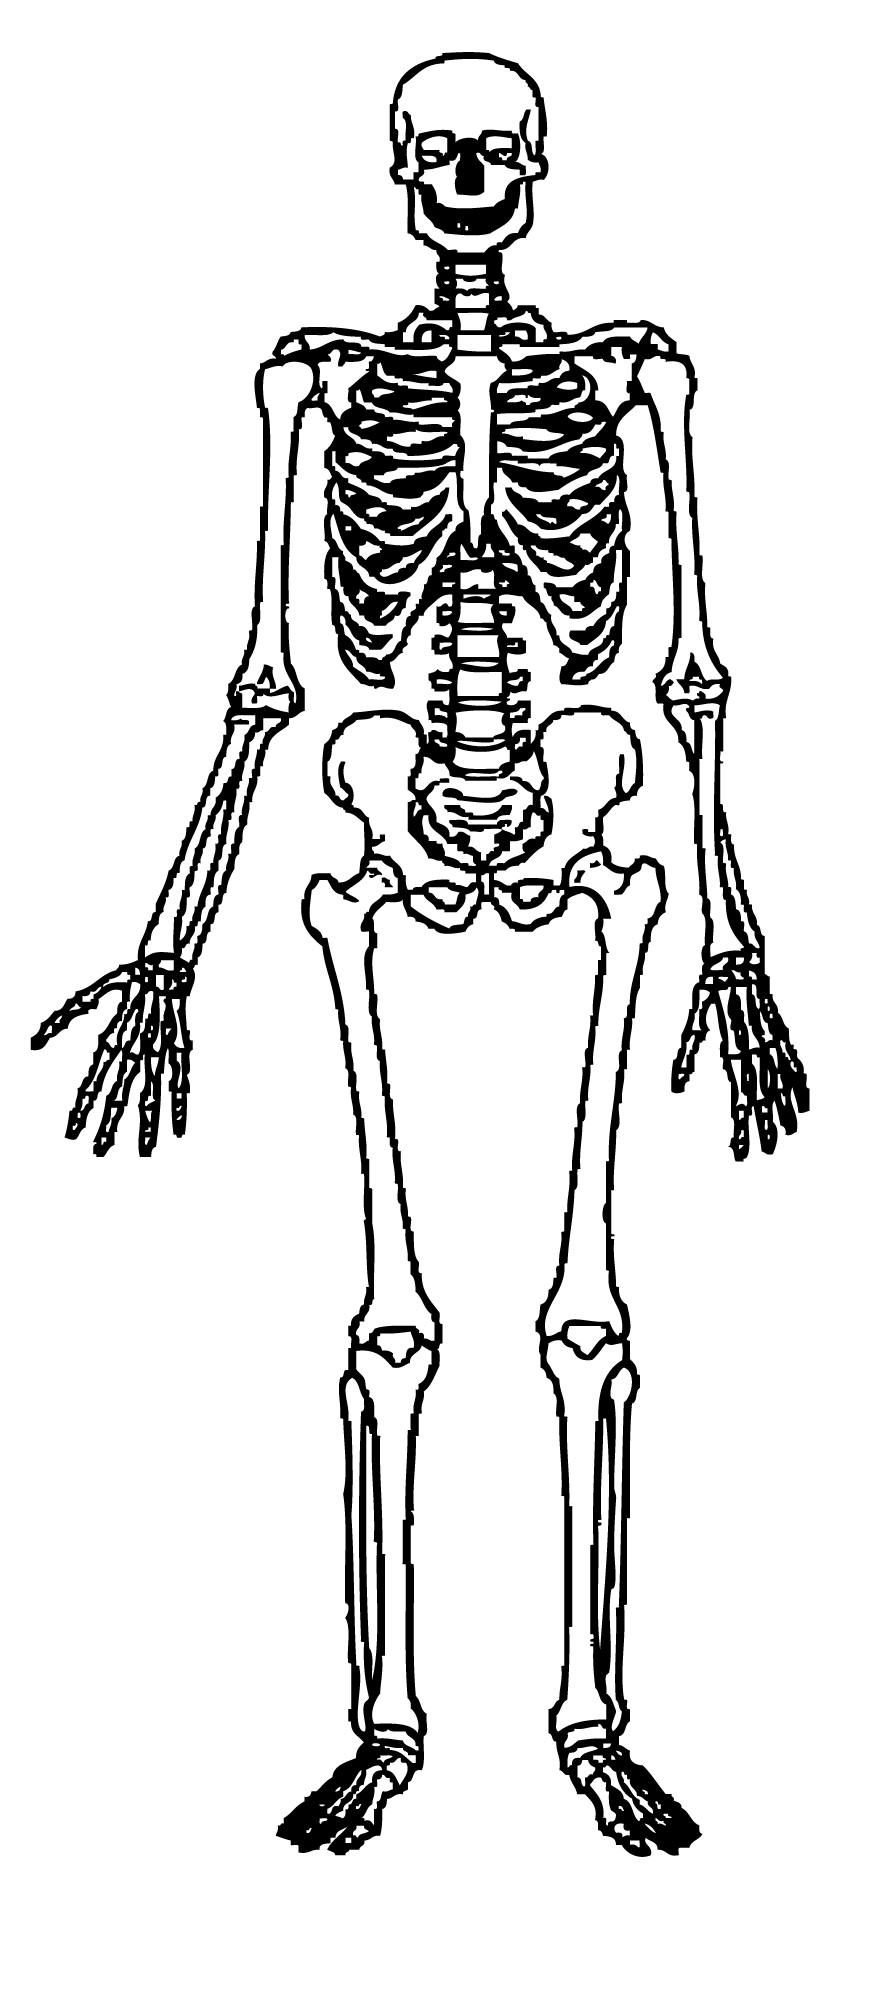 Human Skeleton Clipart   Free Cliparts   Clipart Best   Clipart Best